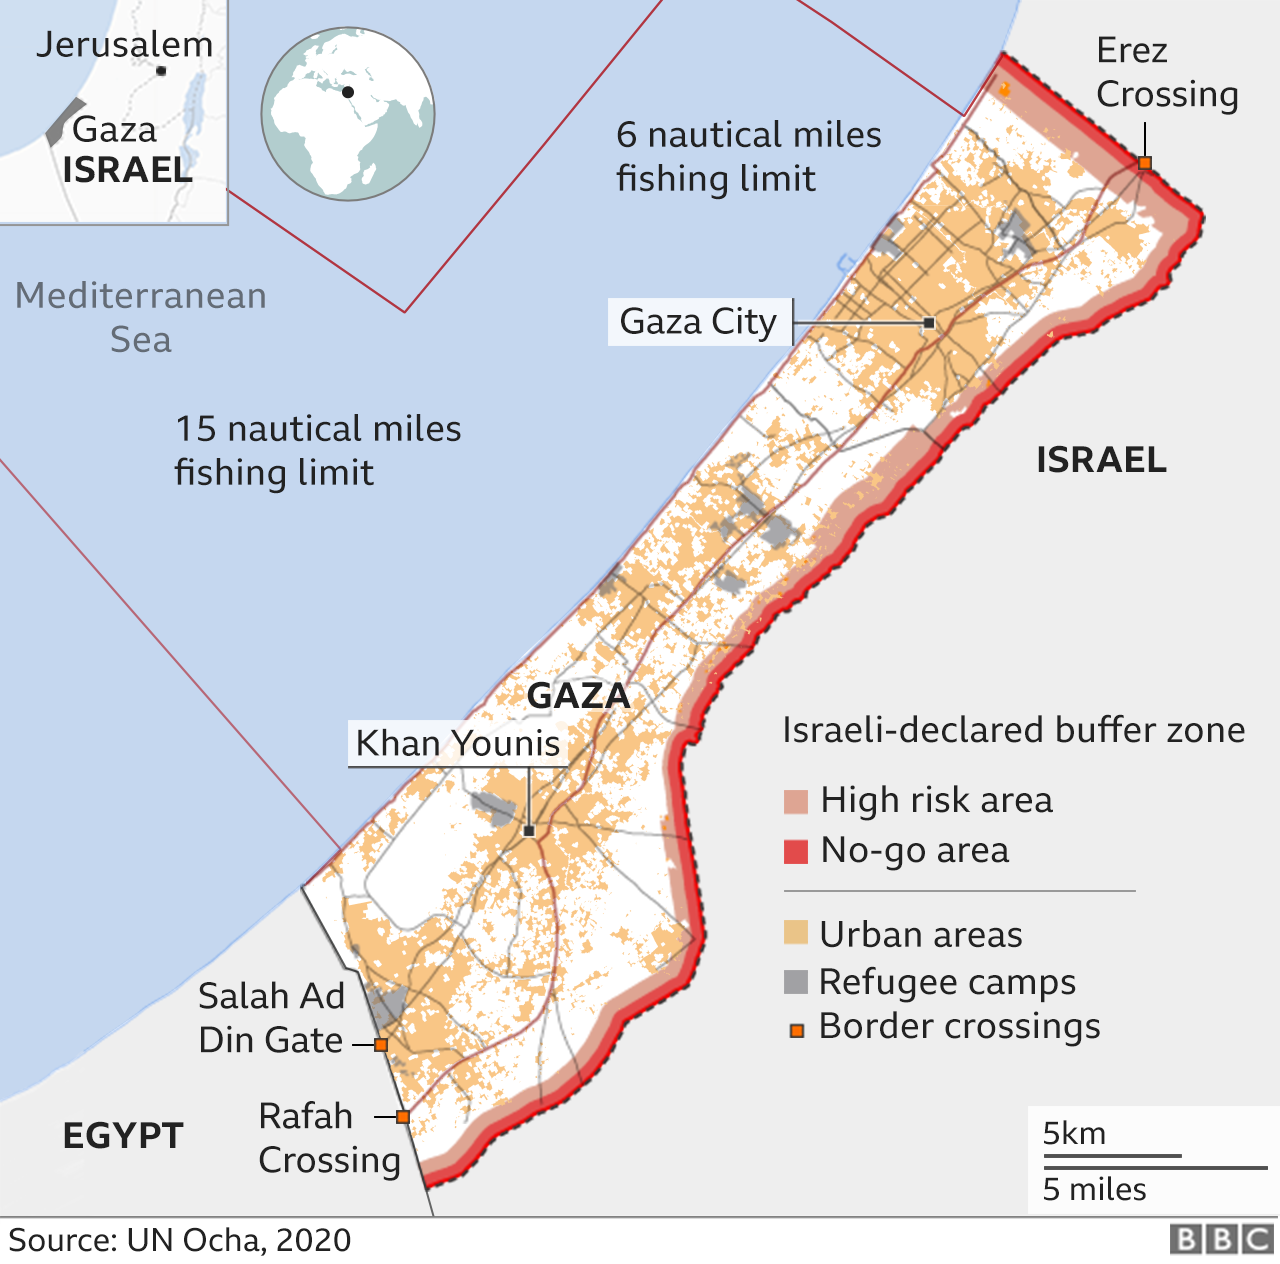 IsraelPalestinian conflict Life in the Gaza Strip BBC News